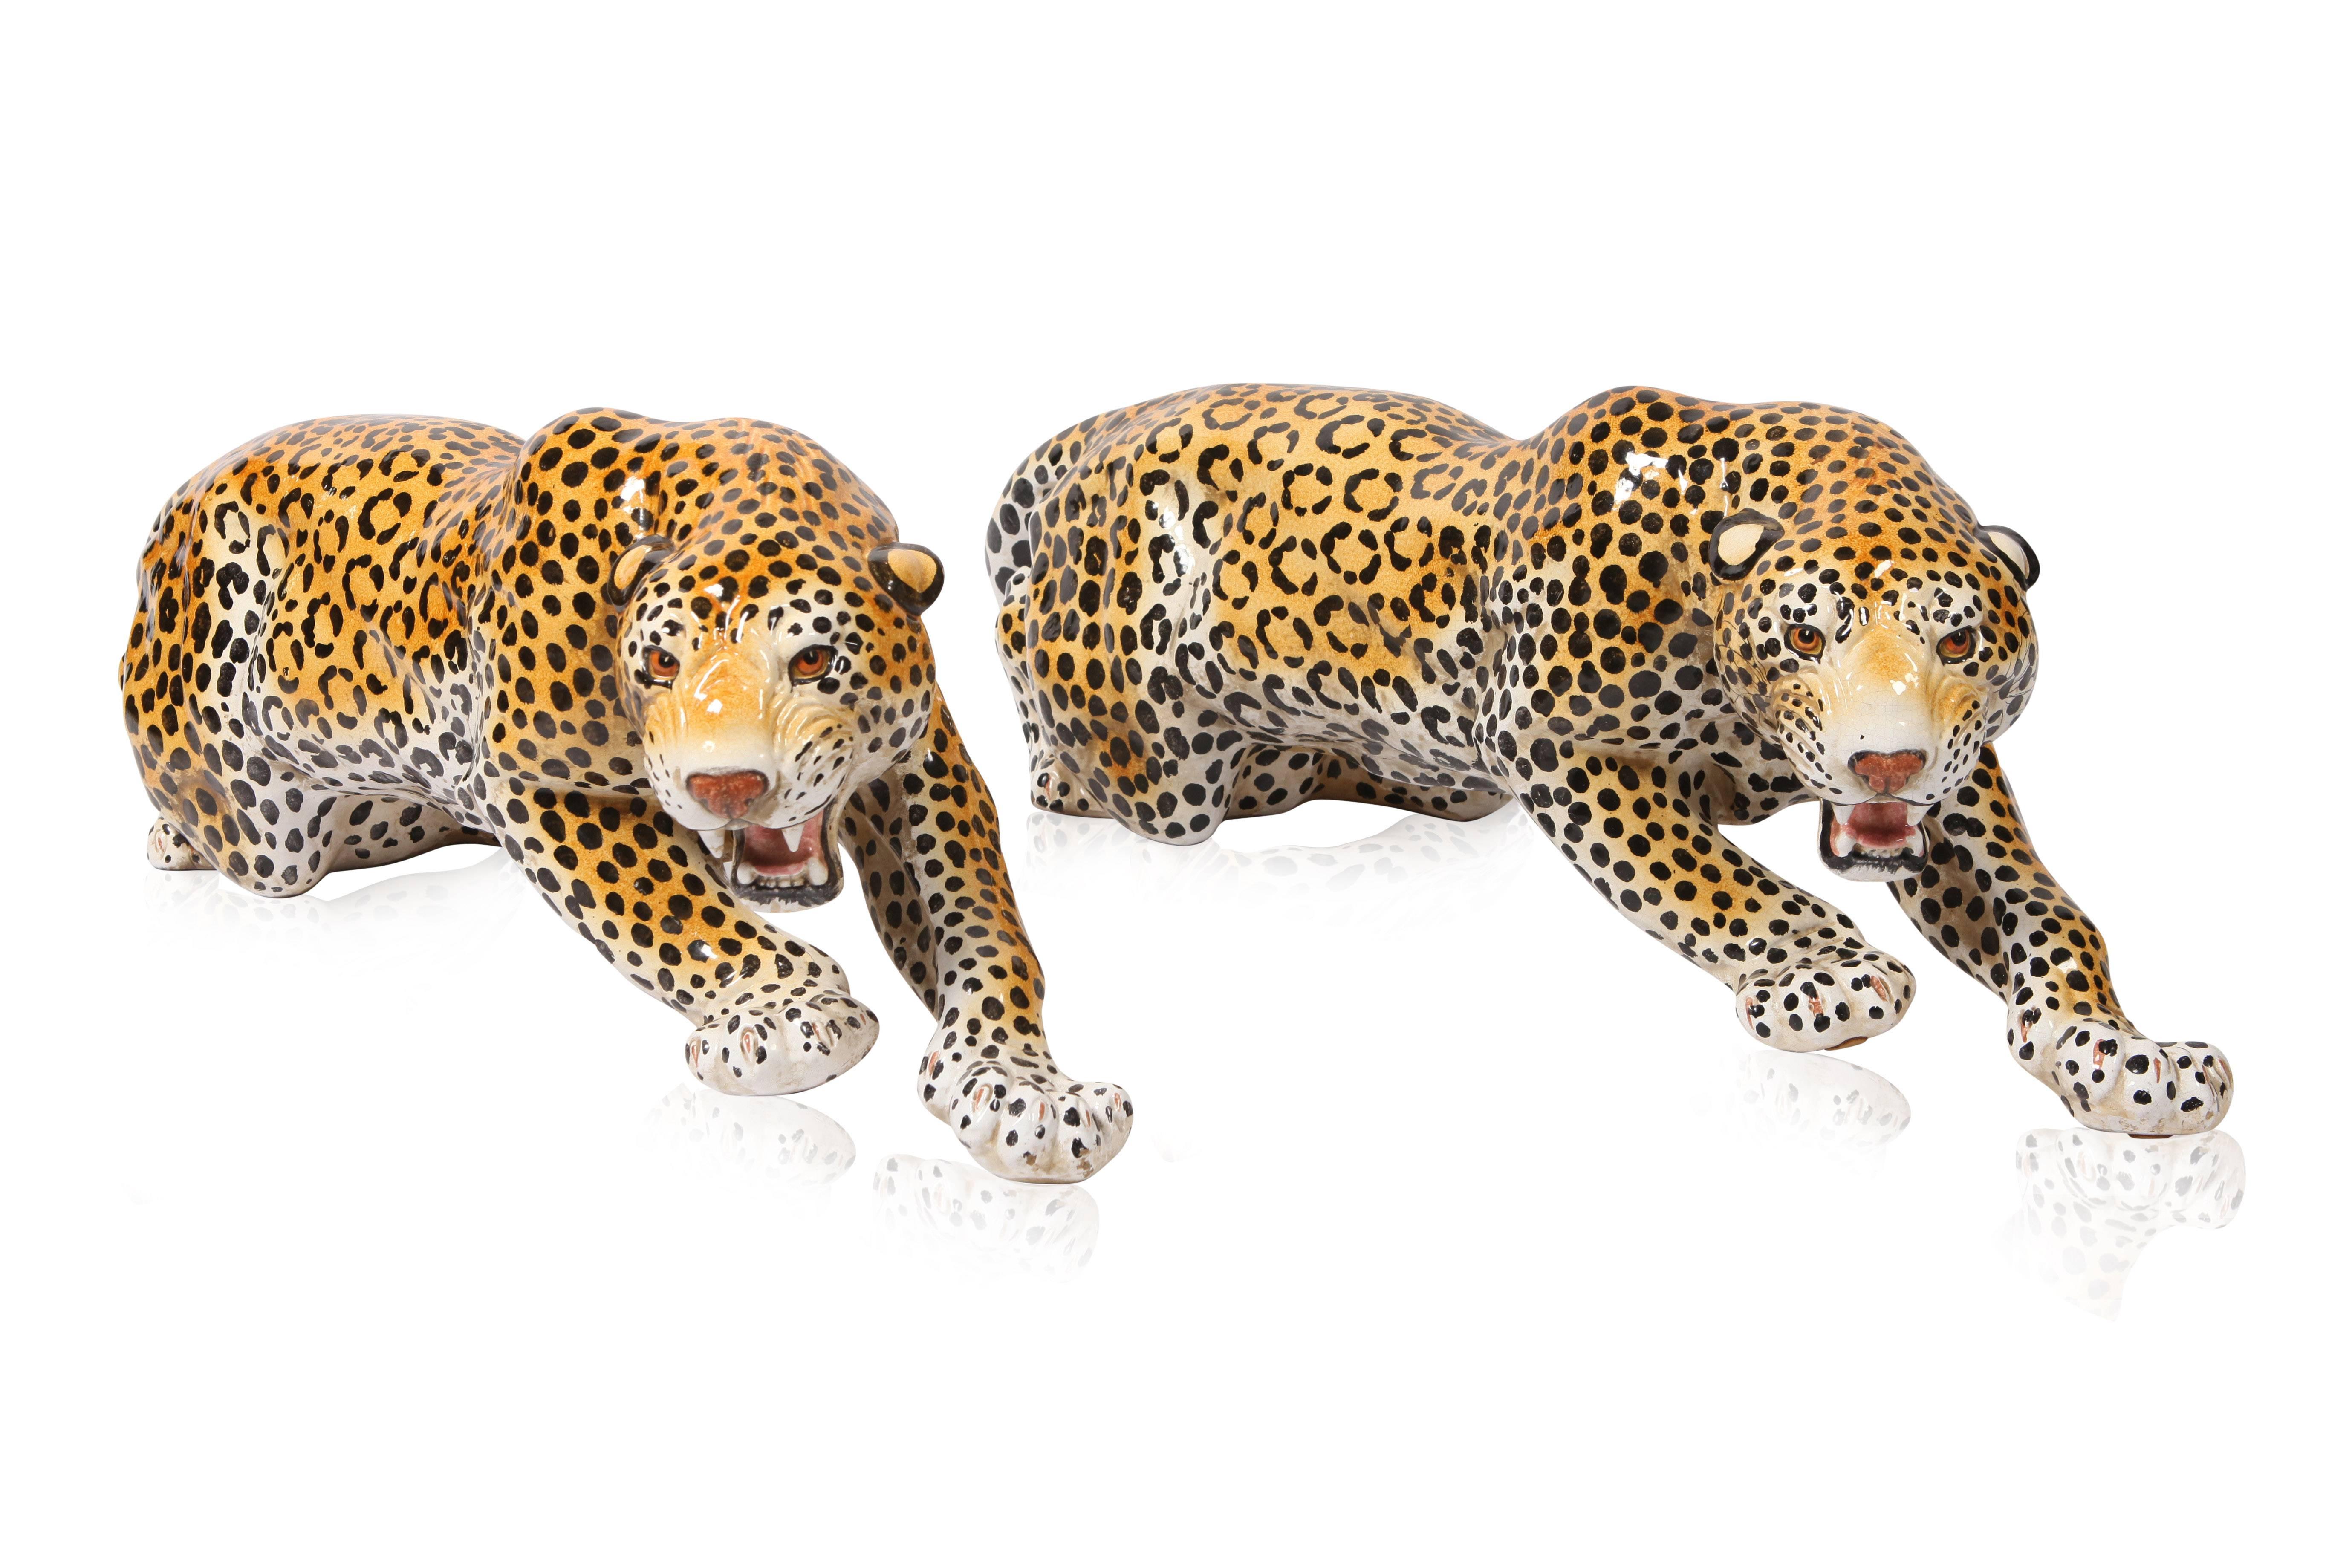 Mid-20th Century Pair of Giant Leopard Sculptures